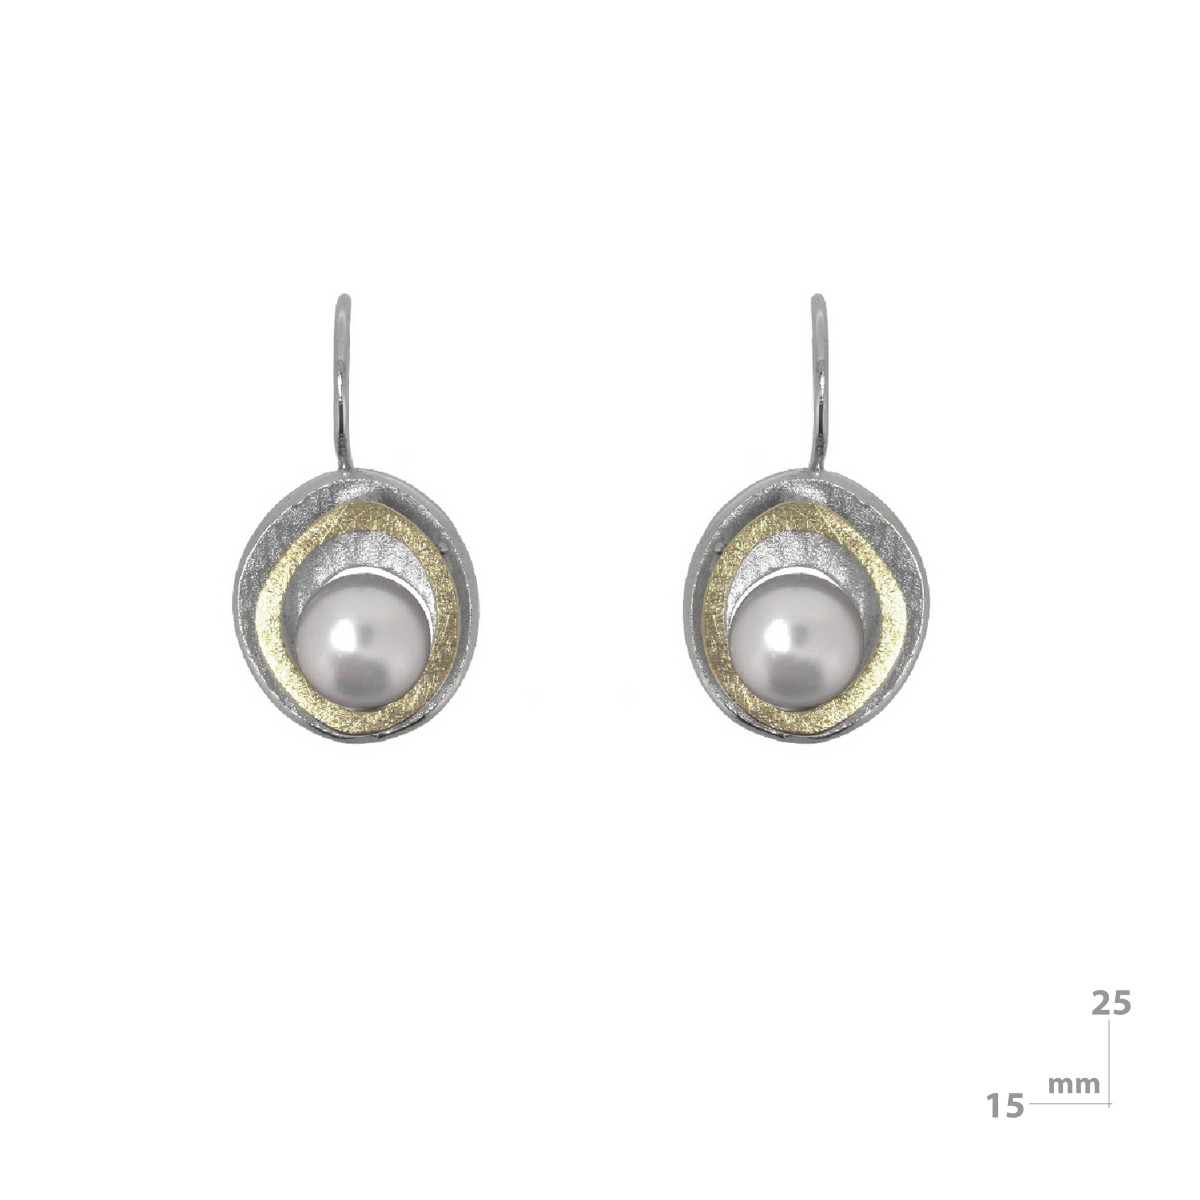 Silver, gold and cultured pearl earrings